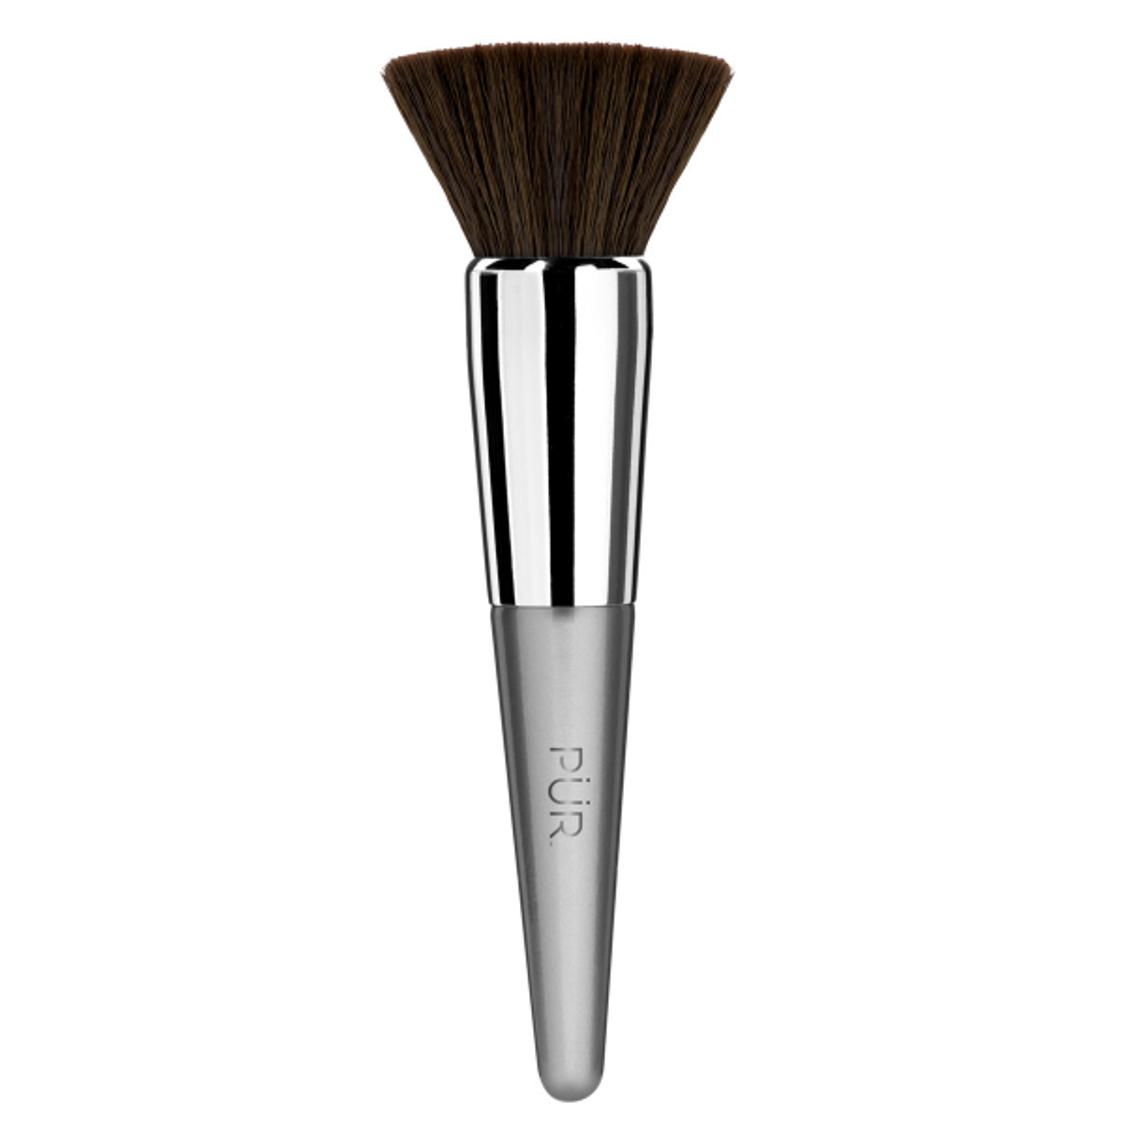 Pr Bholder Dual-action Complexion Applicator Brush - Hairsale.se